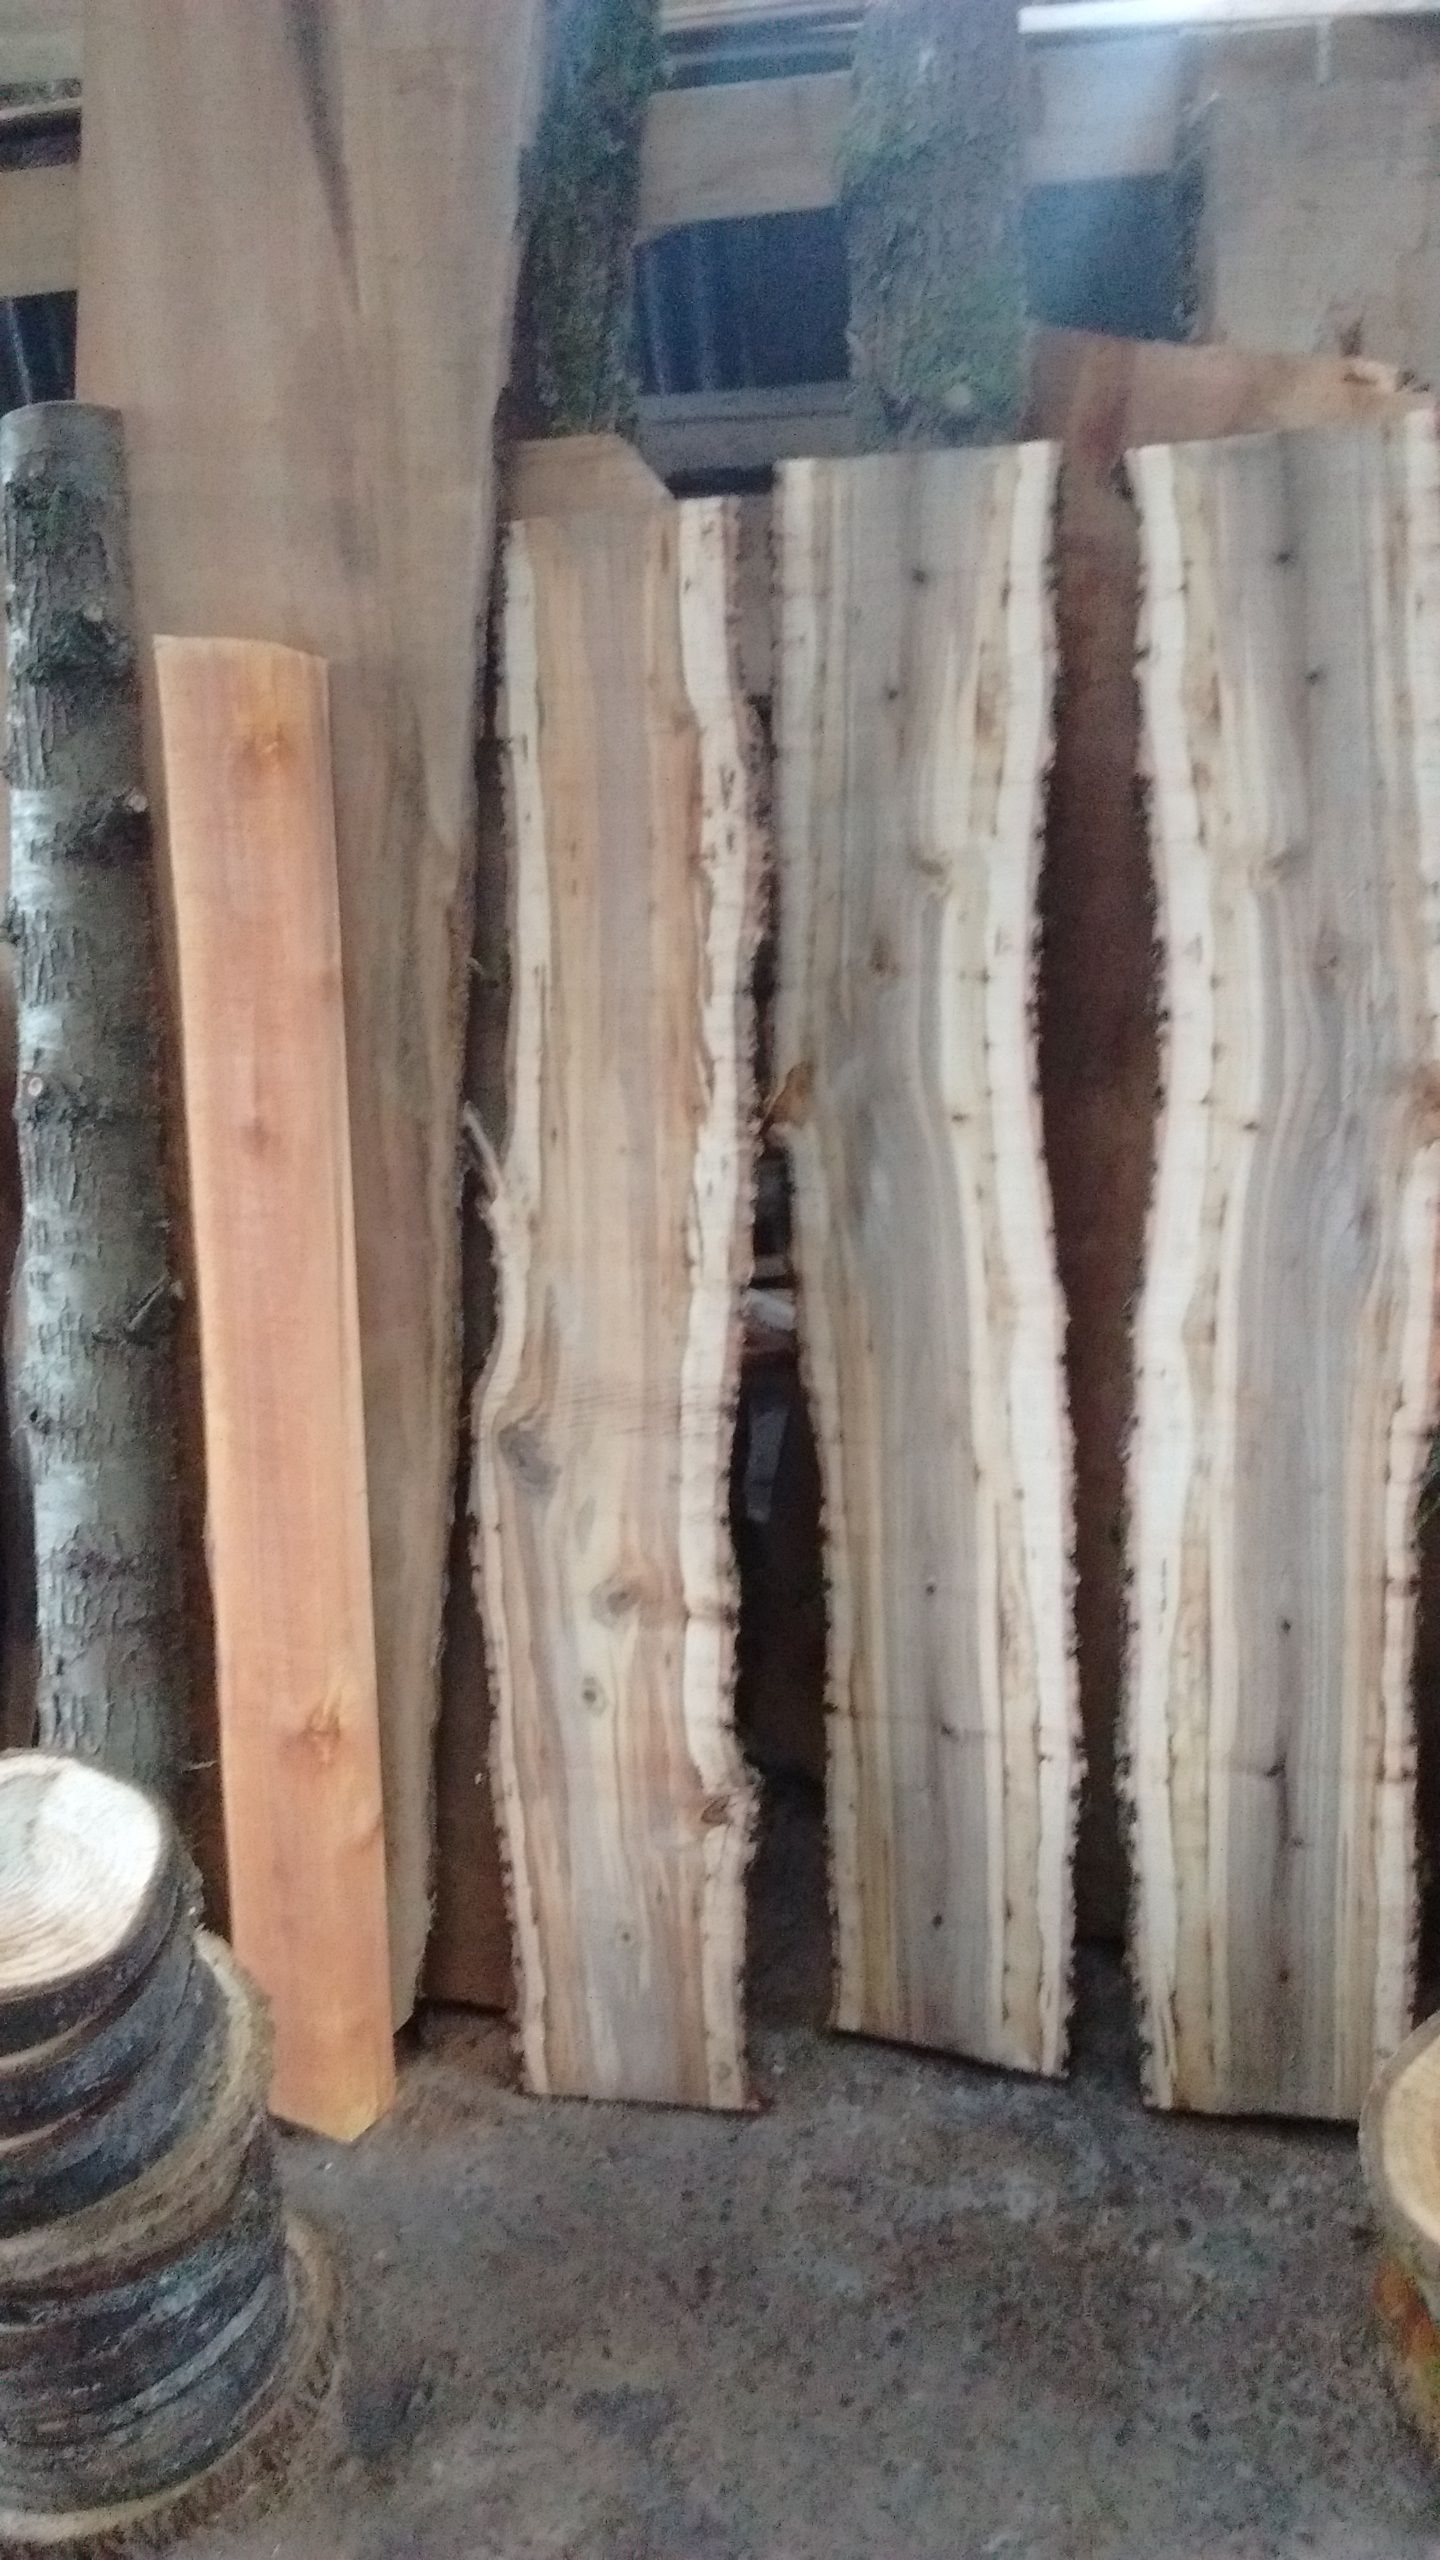 Spalted Maple Slabs 10-12" wide x 2" thick x 58"